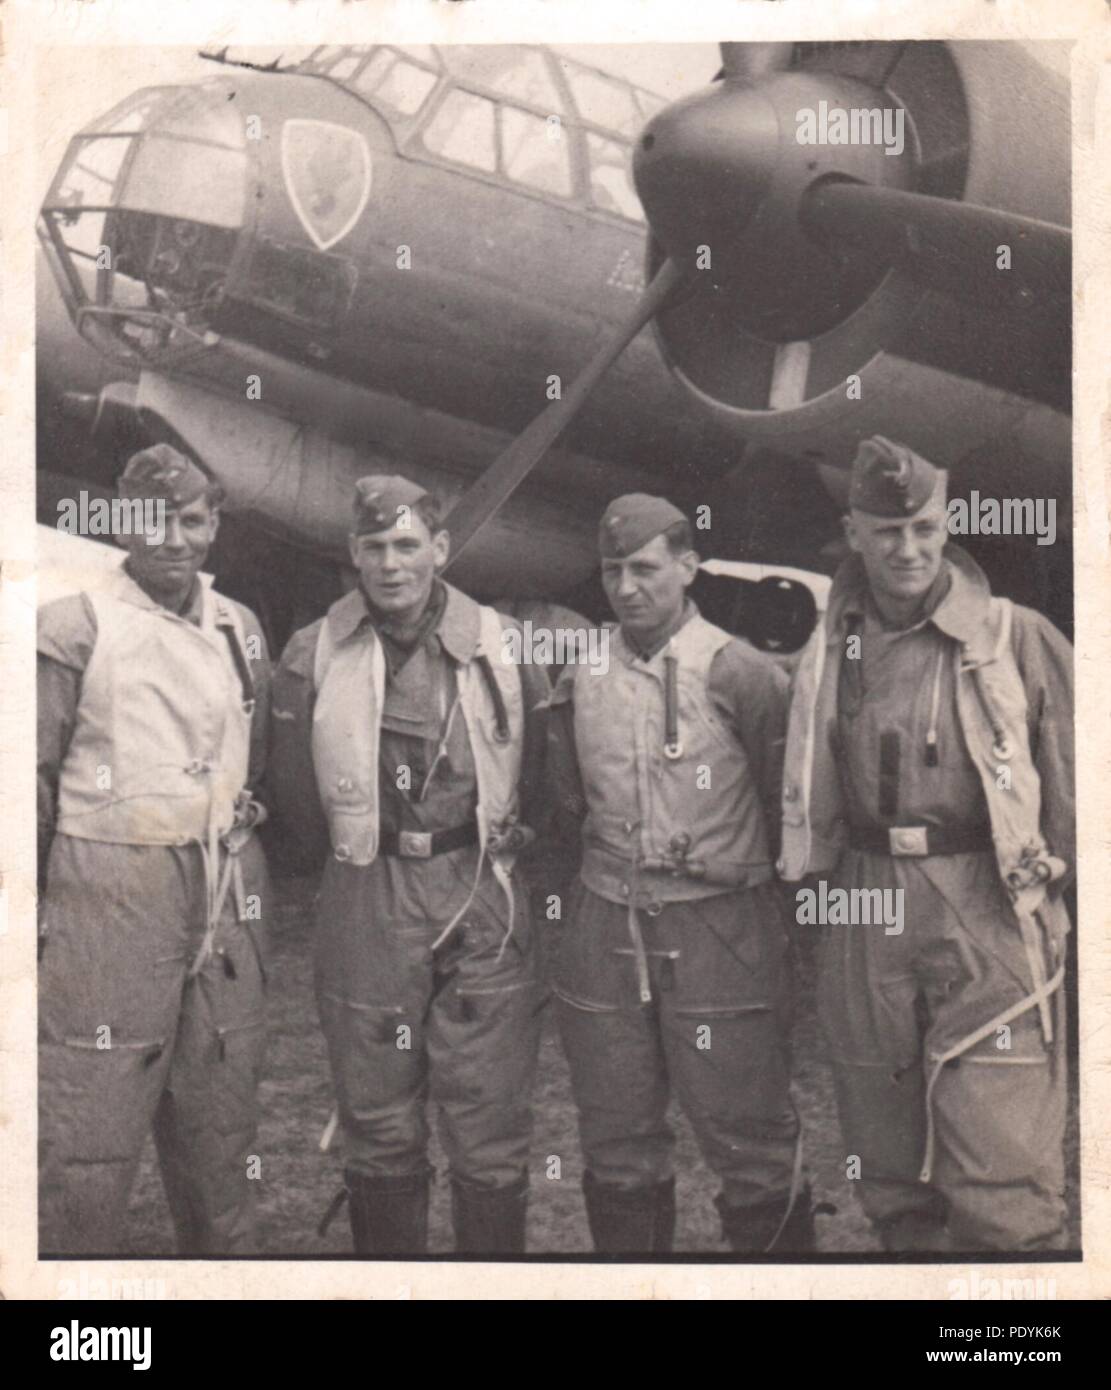 Image from the photo album of Feldwebel Willi Hoffmann of 5. Staffel, Kampfgeschwader 30: Willi Erkens and his crew from 5./KG 30 pose beside their Junkers Ju 88A-1 bomber in April 1940. Left to right: Gefreiter Wilhelm Hoffmann (Air Gunner), Unteroffizier Wilhelm Erkens (Pilot), Unteroffizier Richard Müller (Observer), Unteroffizier Otto Beinmüller (Radio Operator). The entire crew failed to return from a mission in the Mediterranean on 23rd January 1943. Stock Photo